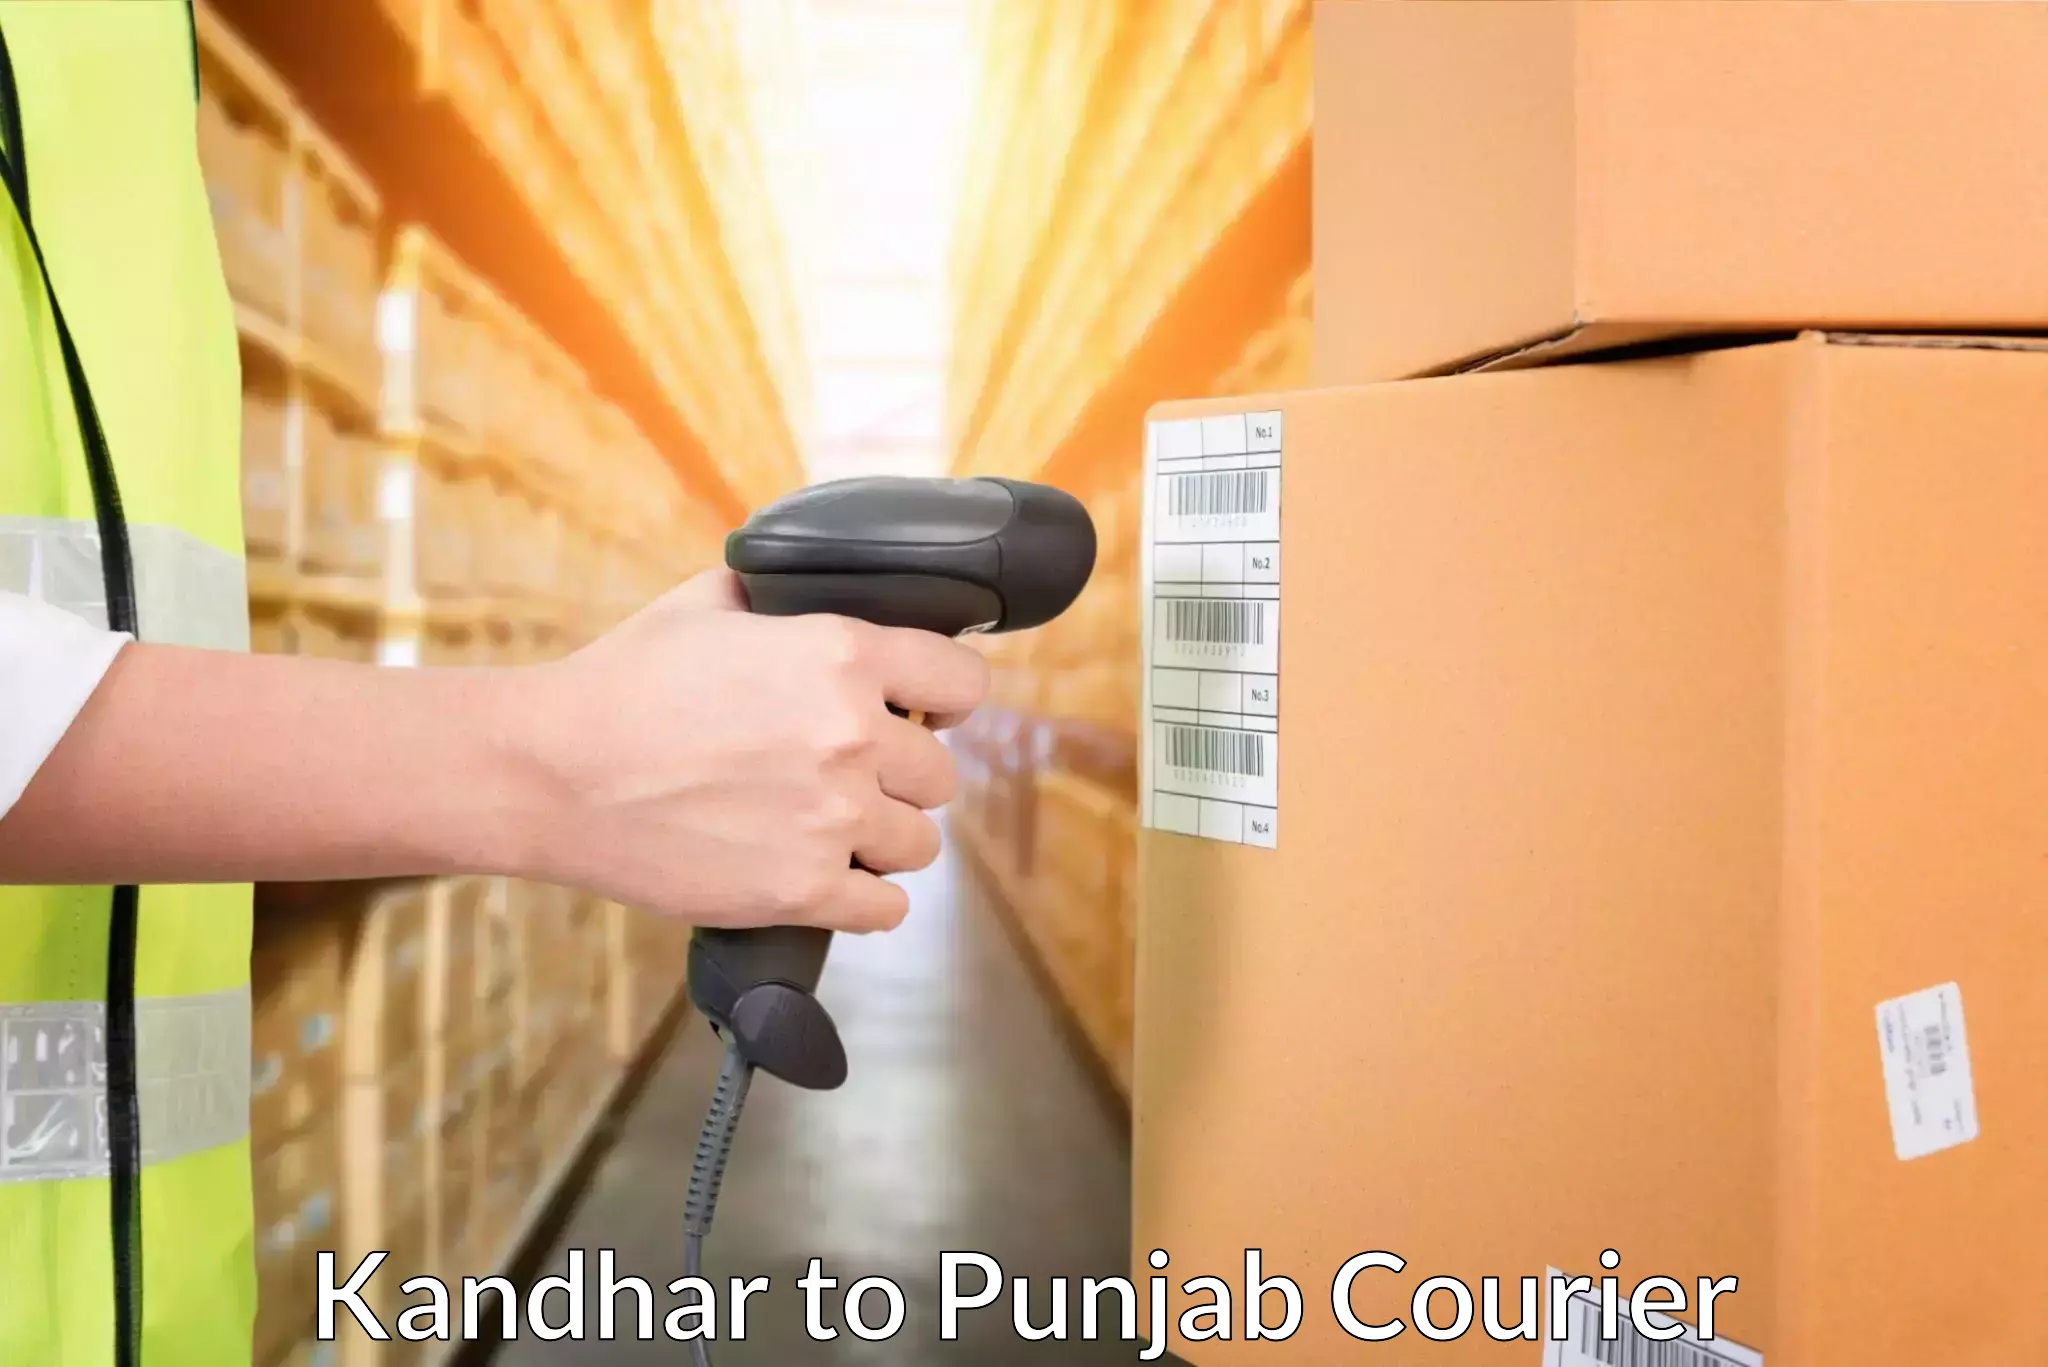 State-of-the-art courier technology Kandhar to Zira